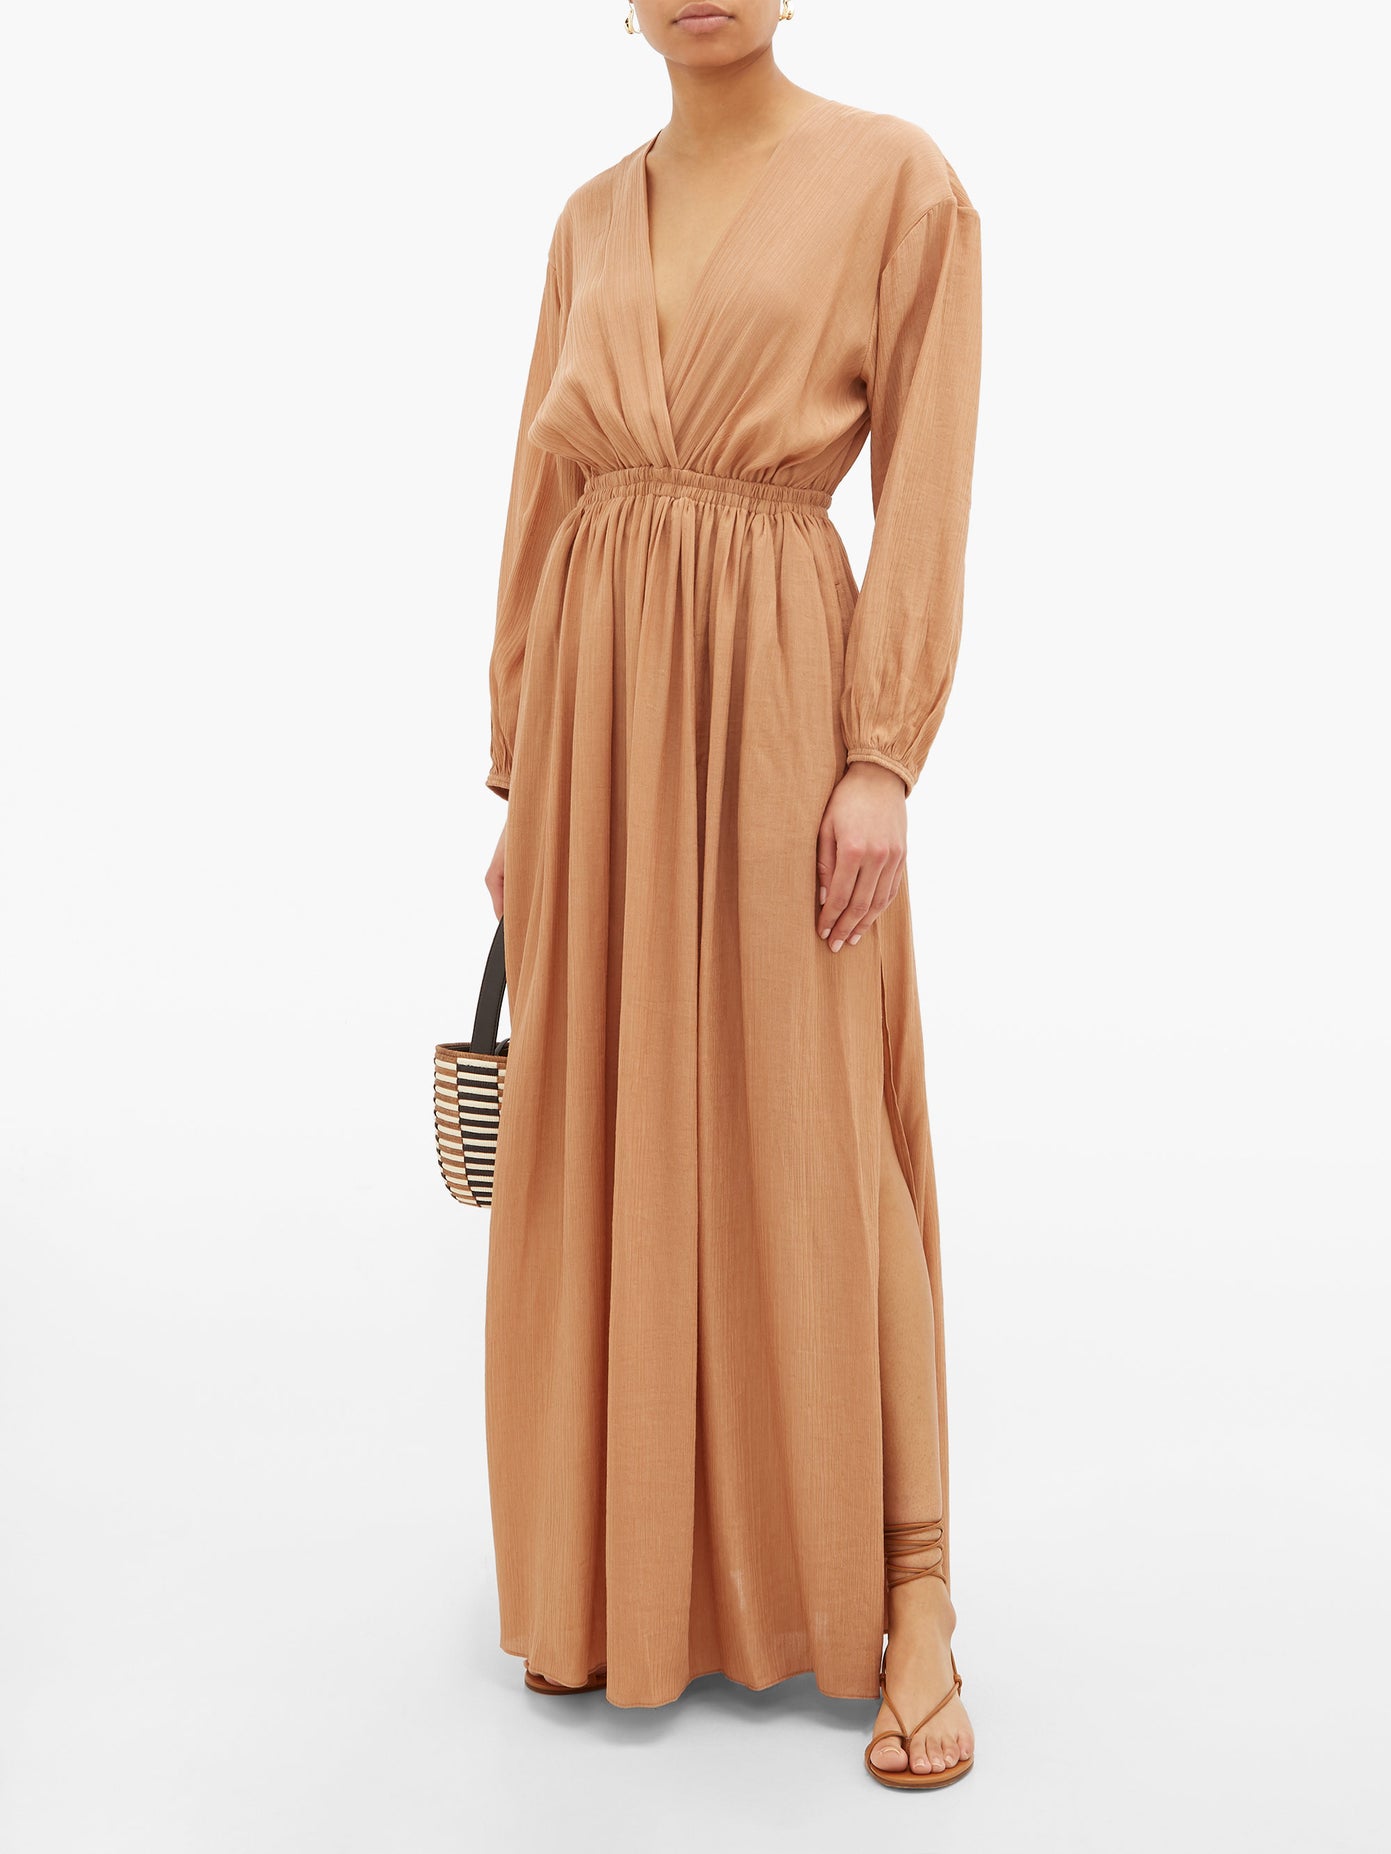 Matteau - The Open Back Plunge Maxi Dress | ABOUT ICONS